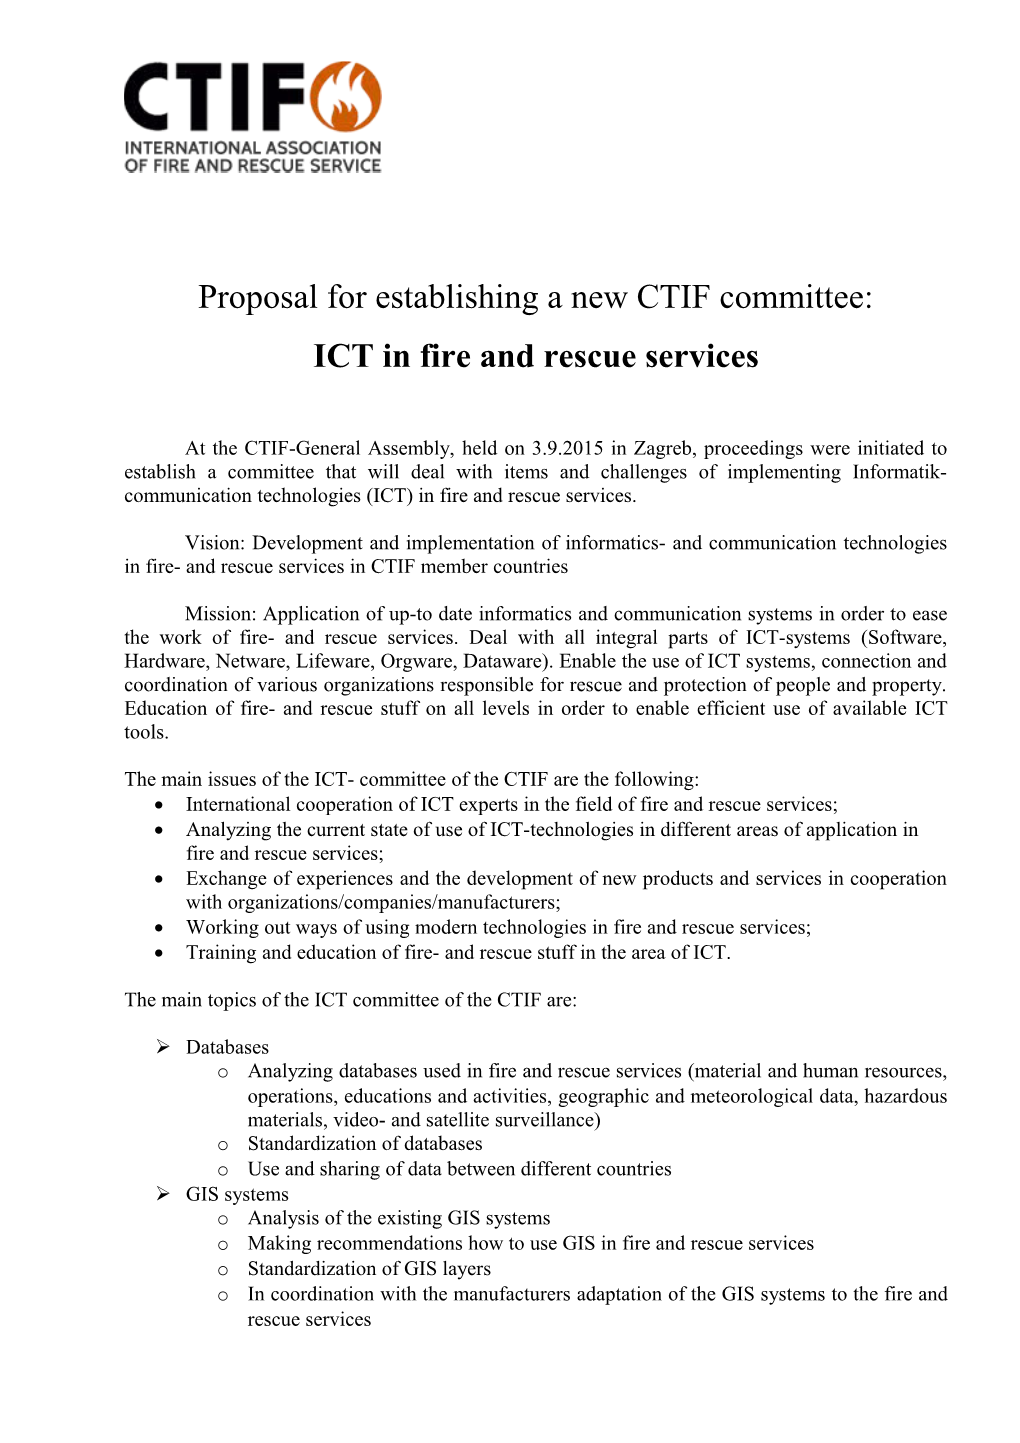 Proposal for Establishing a New CTIF Committee